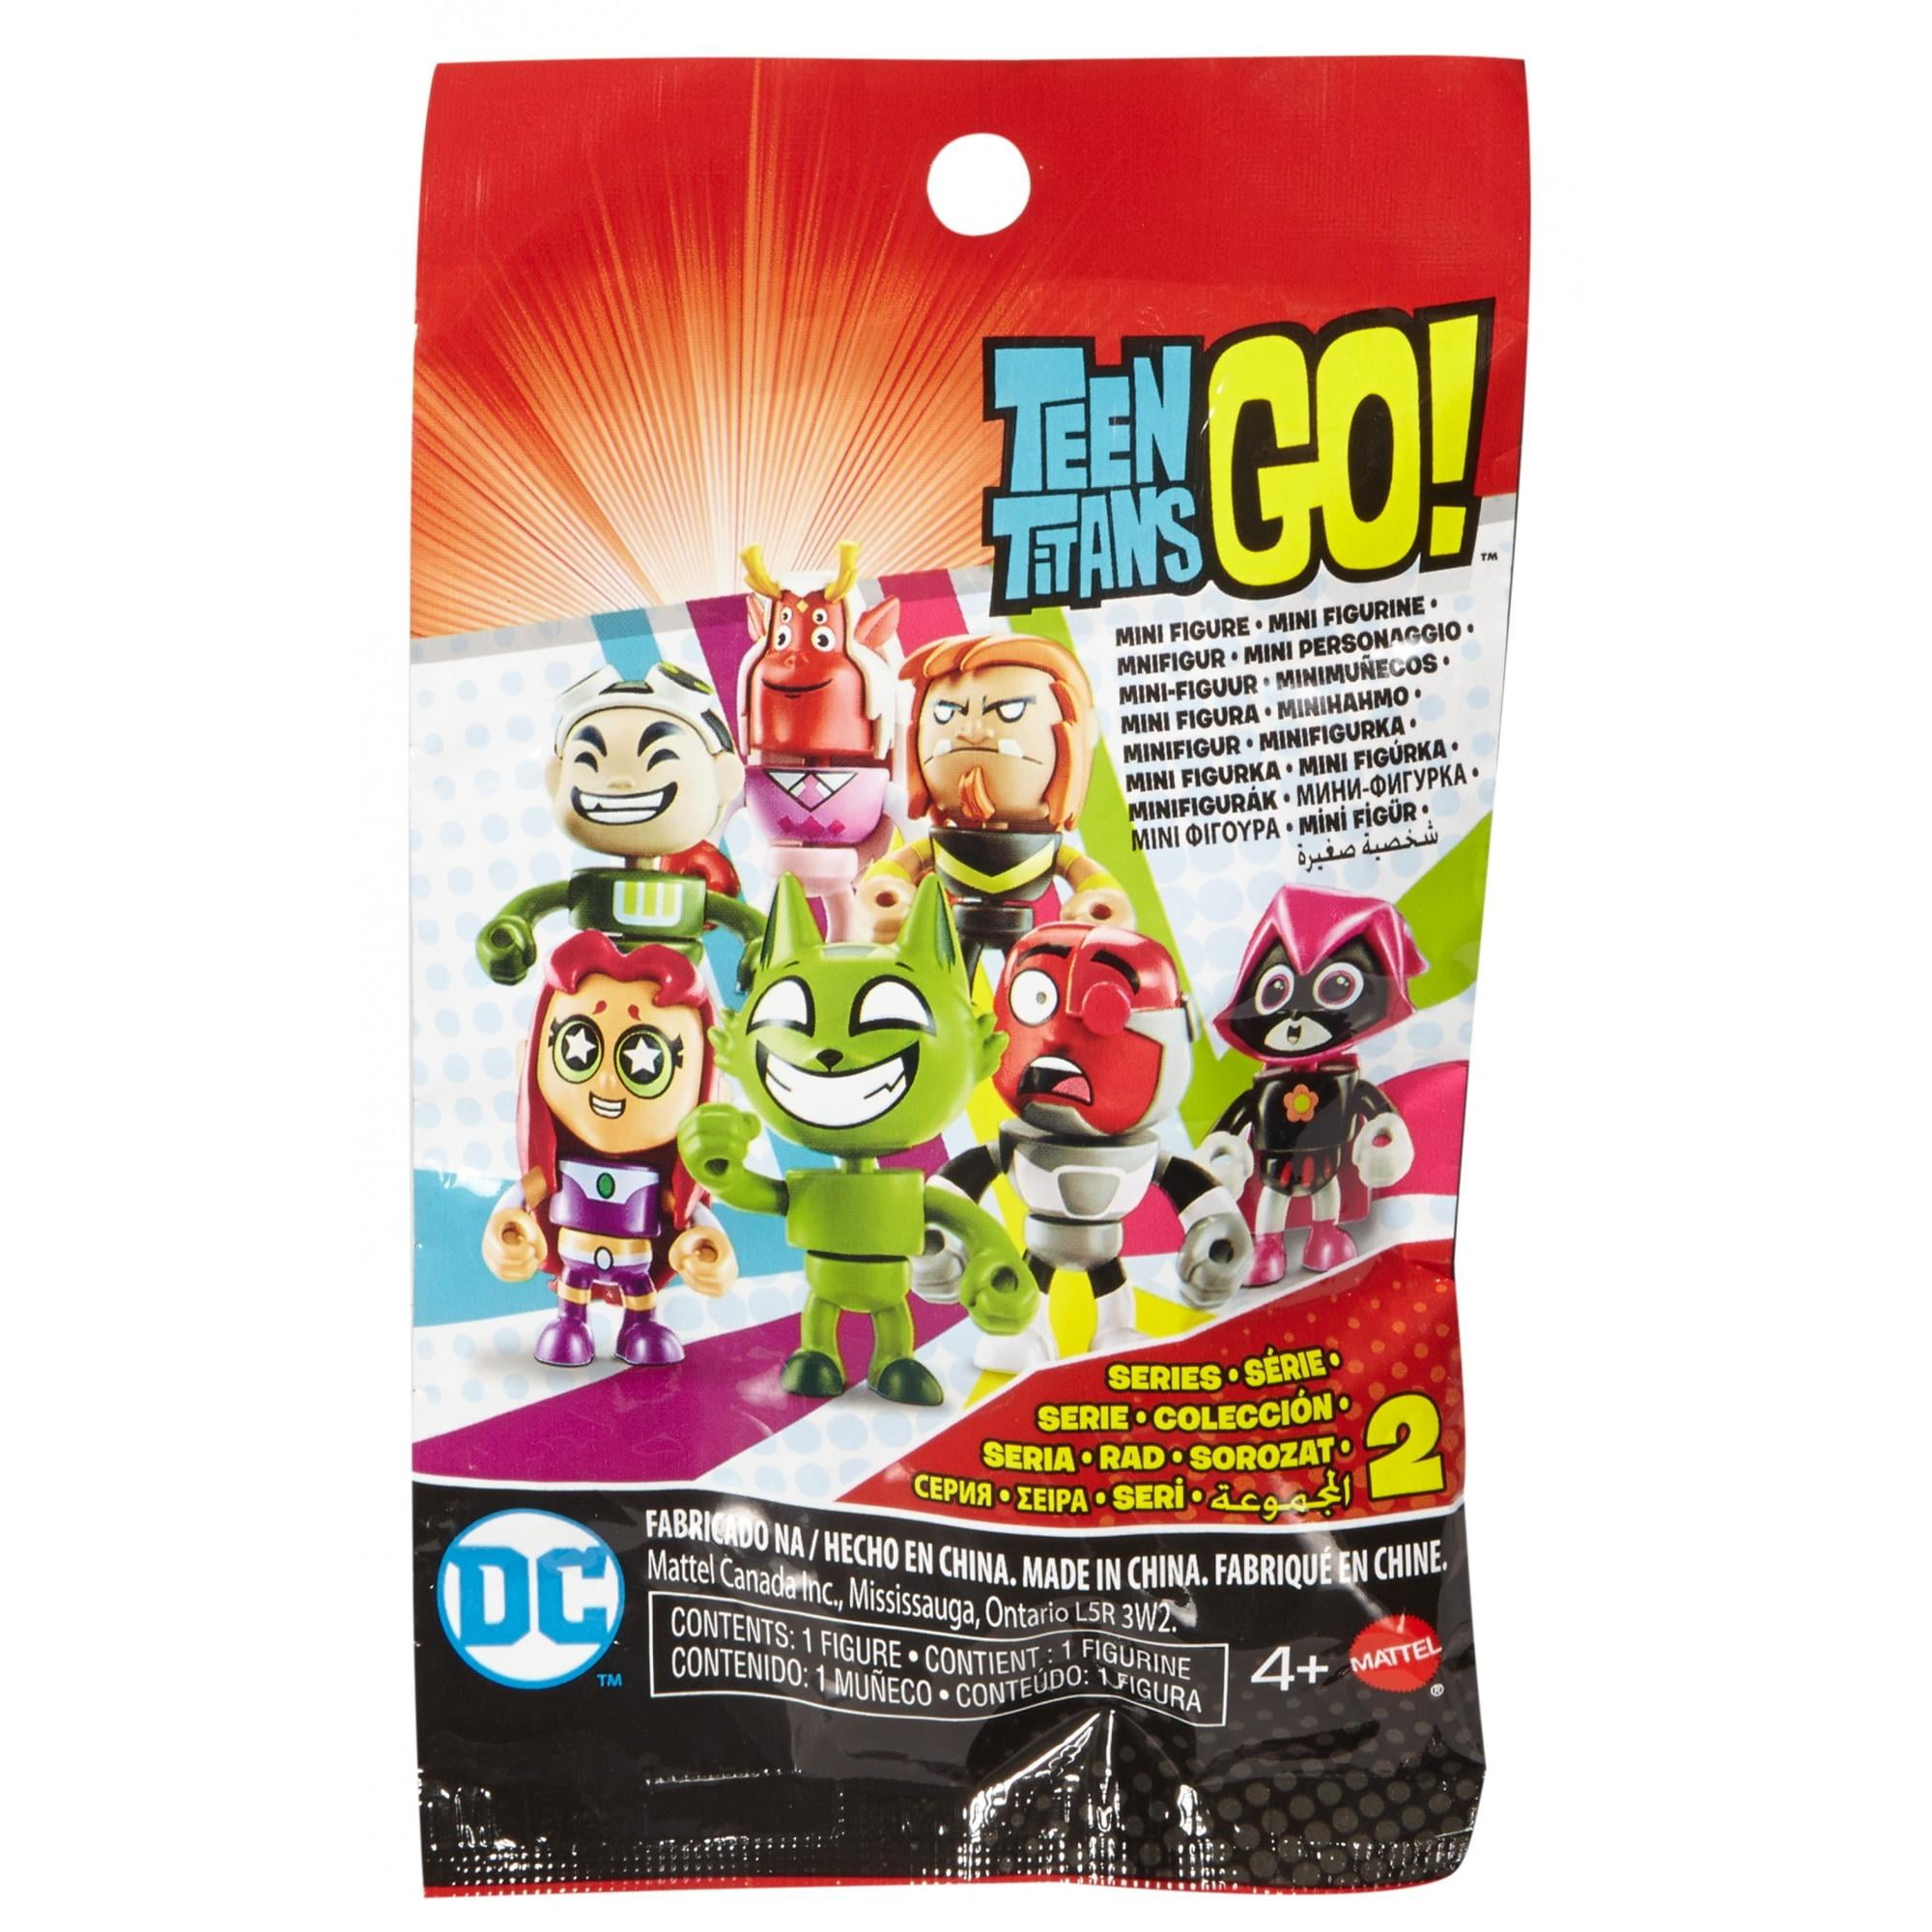 SET OF 5 TEEN TITANS GO MINI FIGURES-BRAND NEW ASSEMBLED W/STANDS-SOME W/ACCESS 